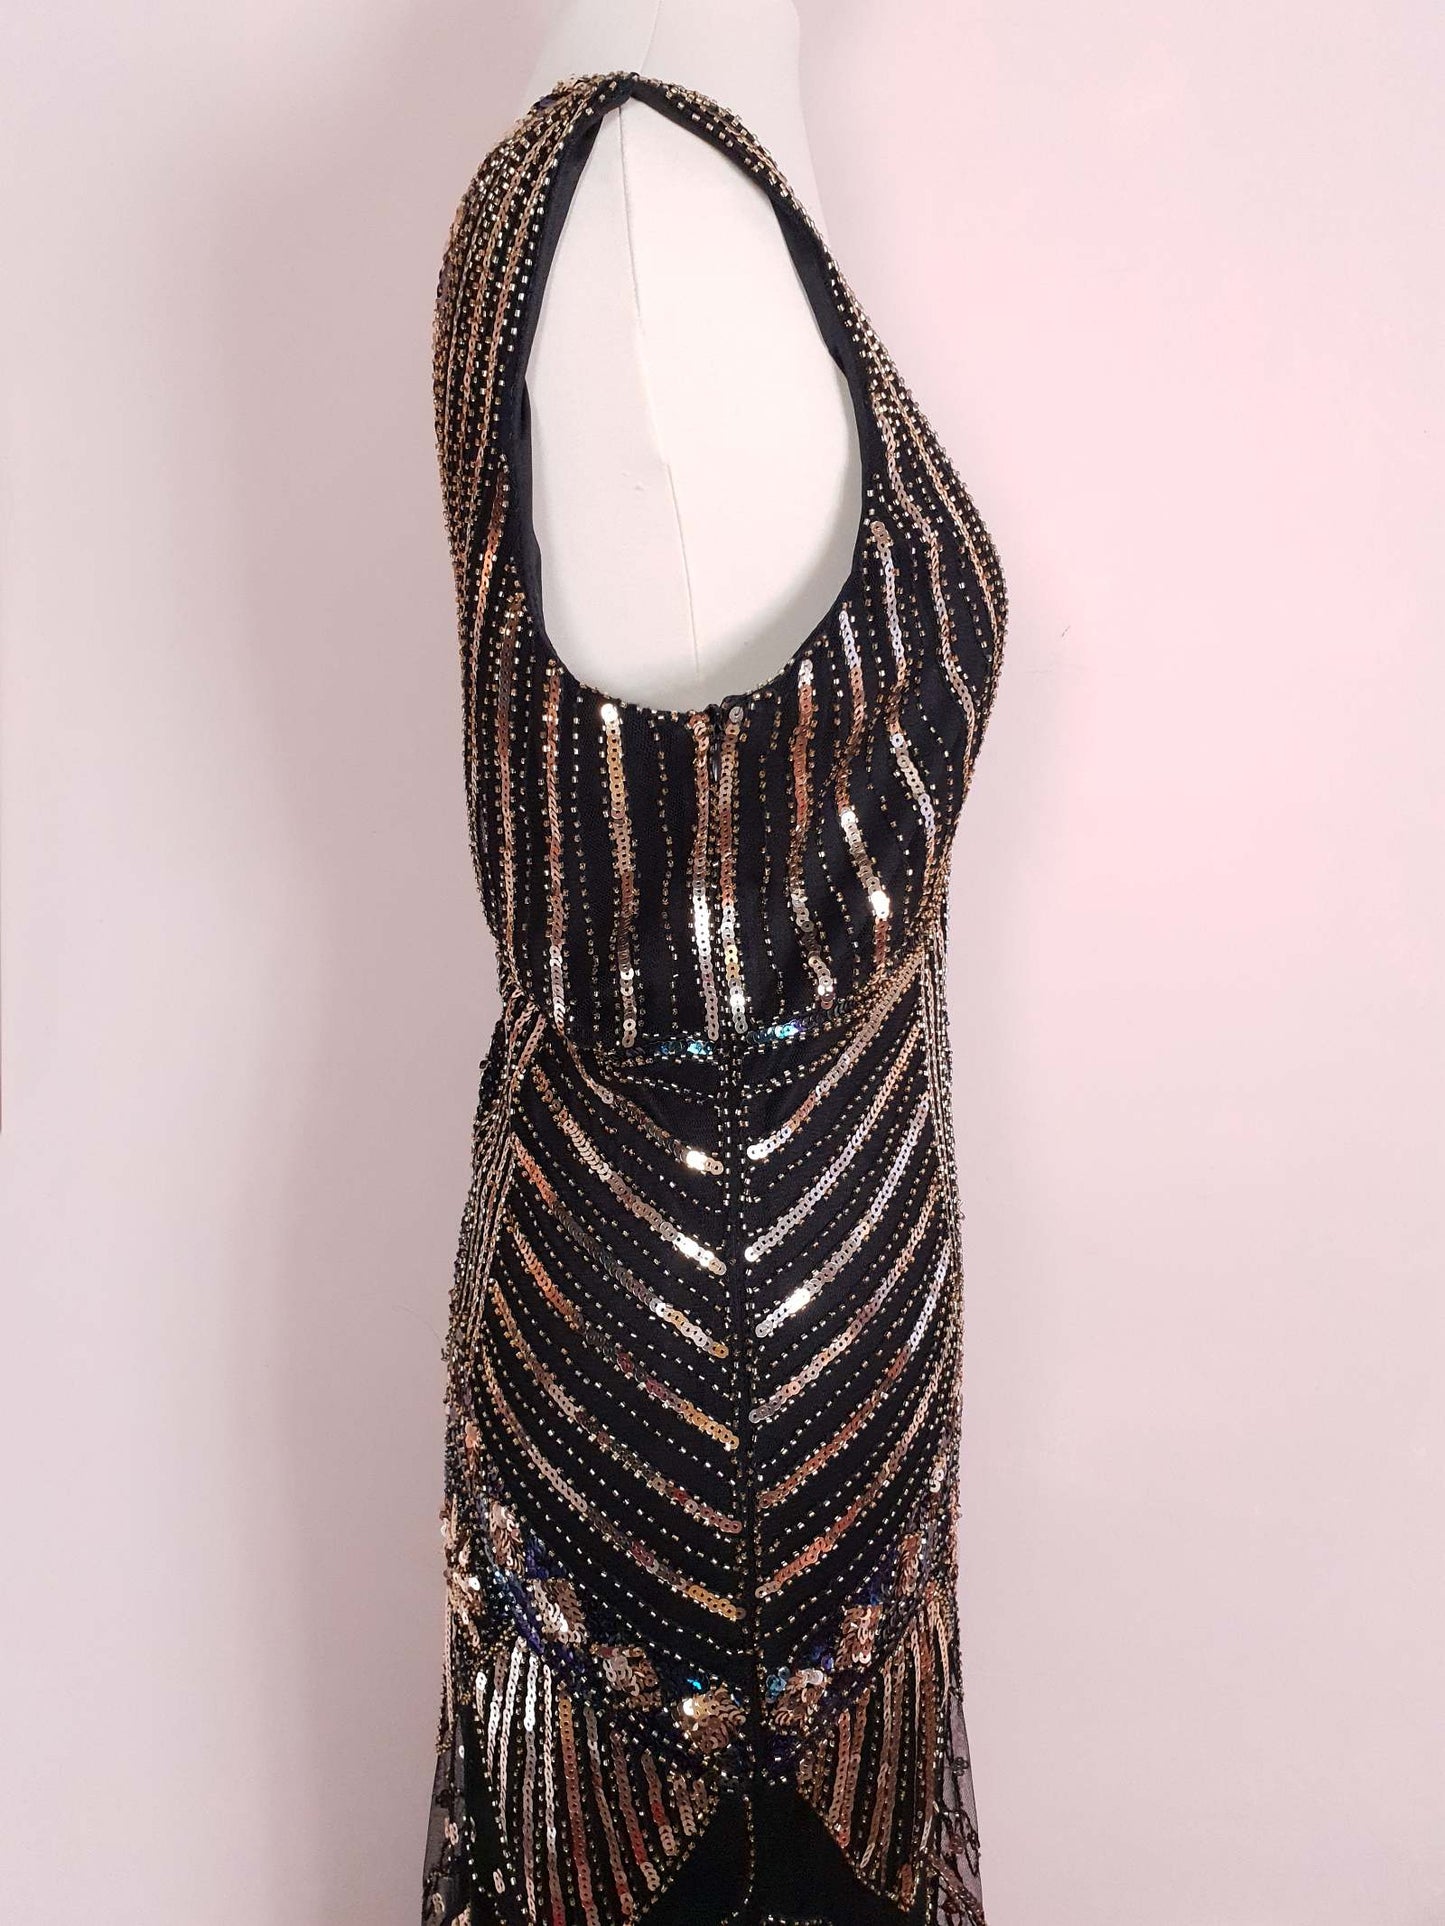 1920s Style Sequin Flapper Party Dress Fringe Midi Size 10/12 - Pre-owned